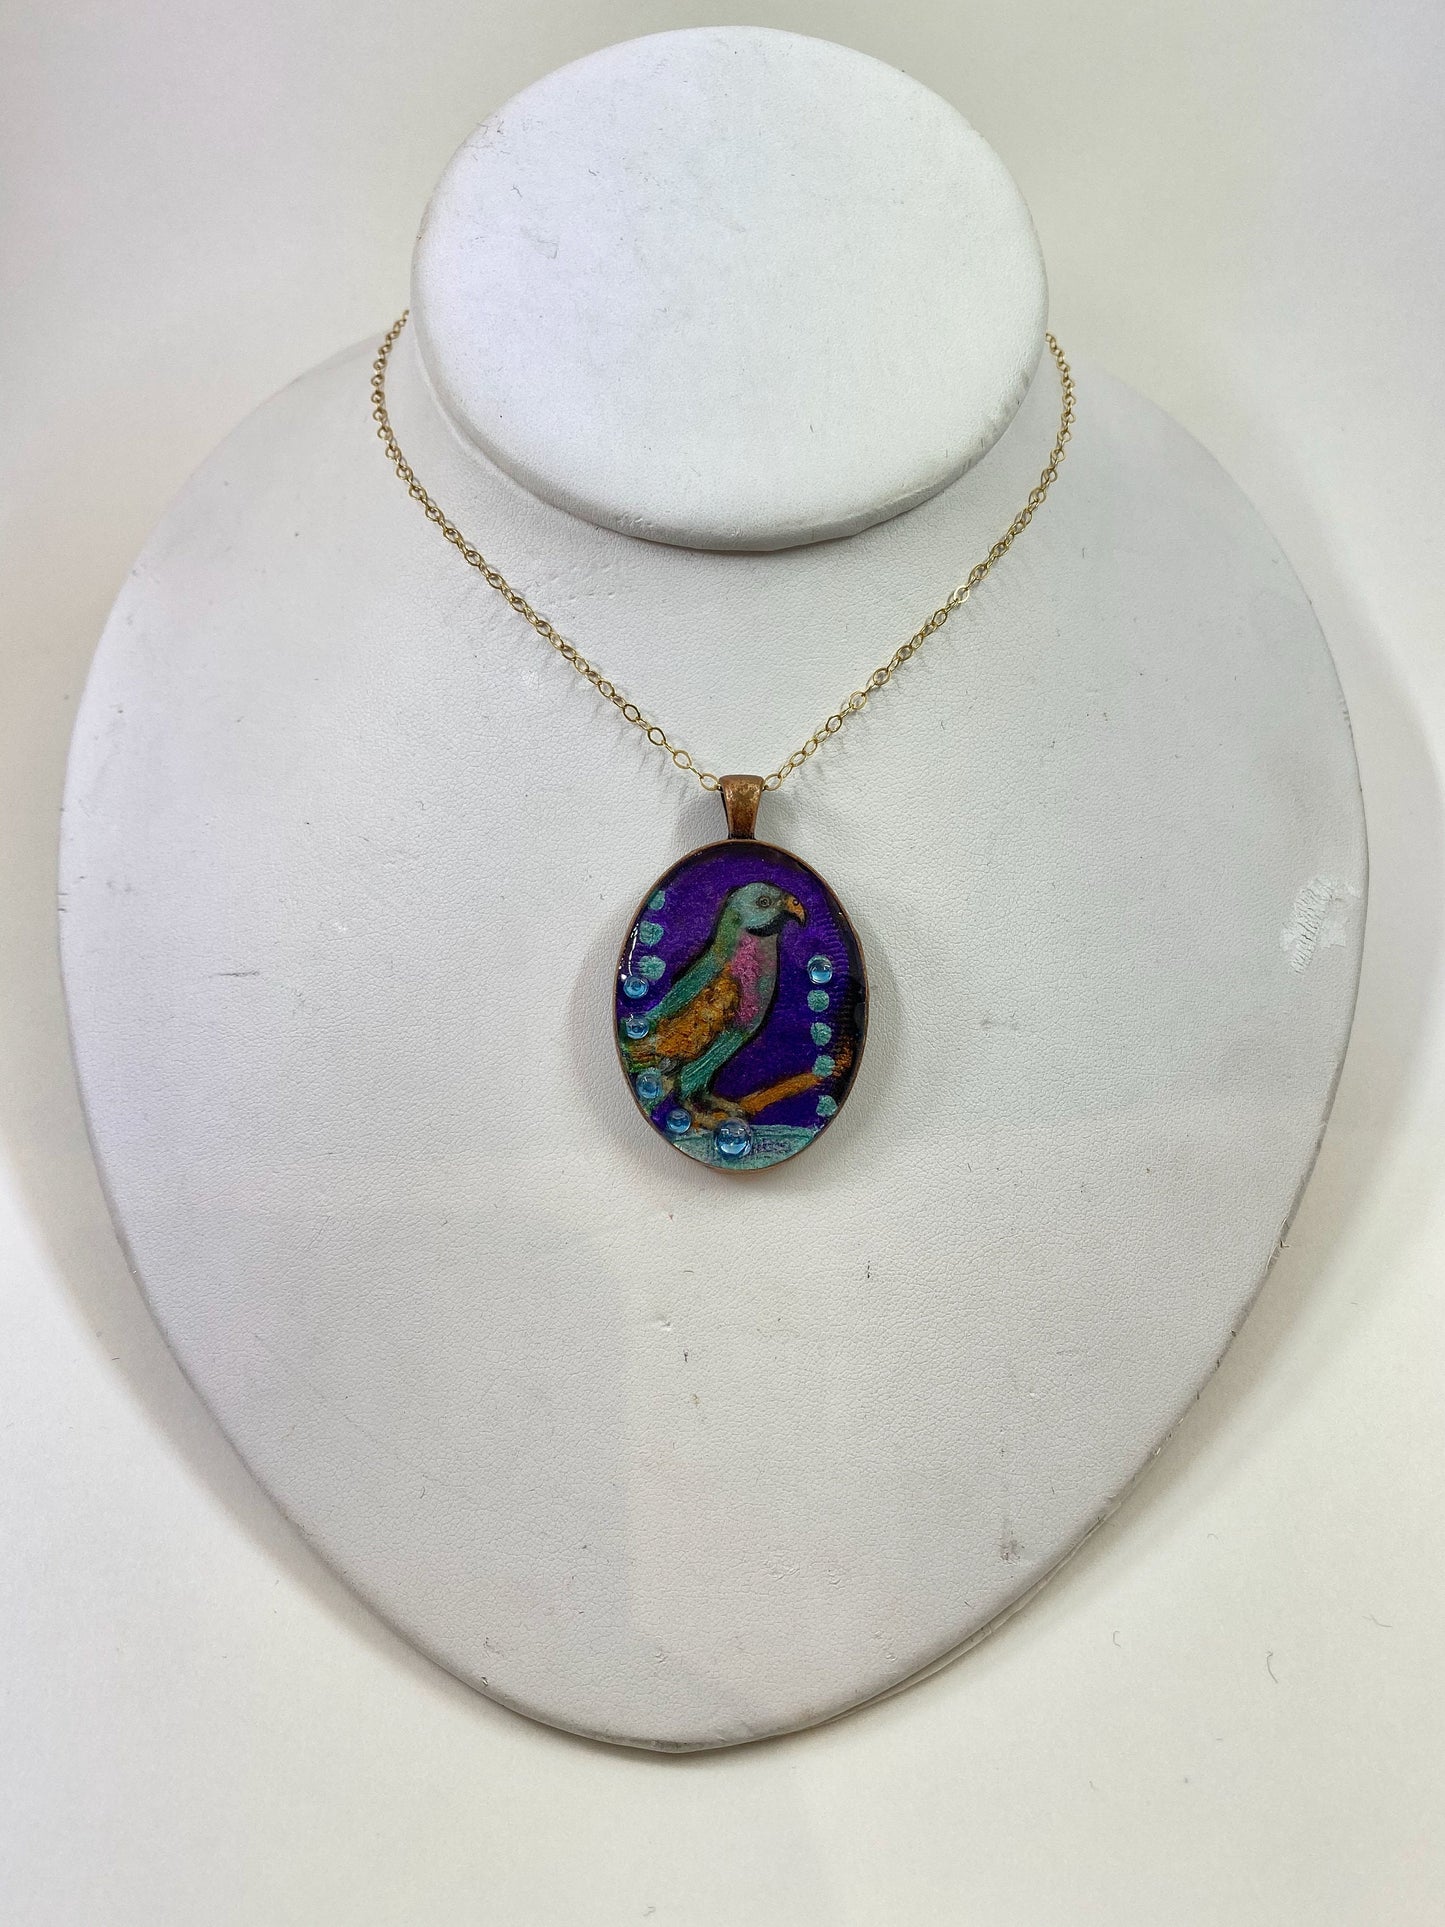 Bird and crystal pendant. Hand painted bird design with crystal accents. Brass frame and 14 karat gold filled chain.